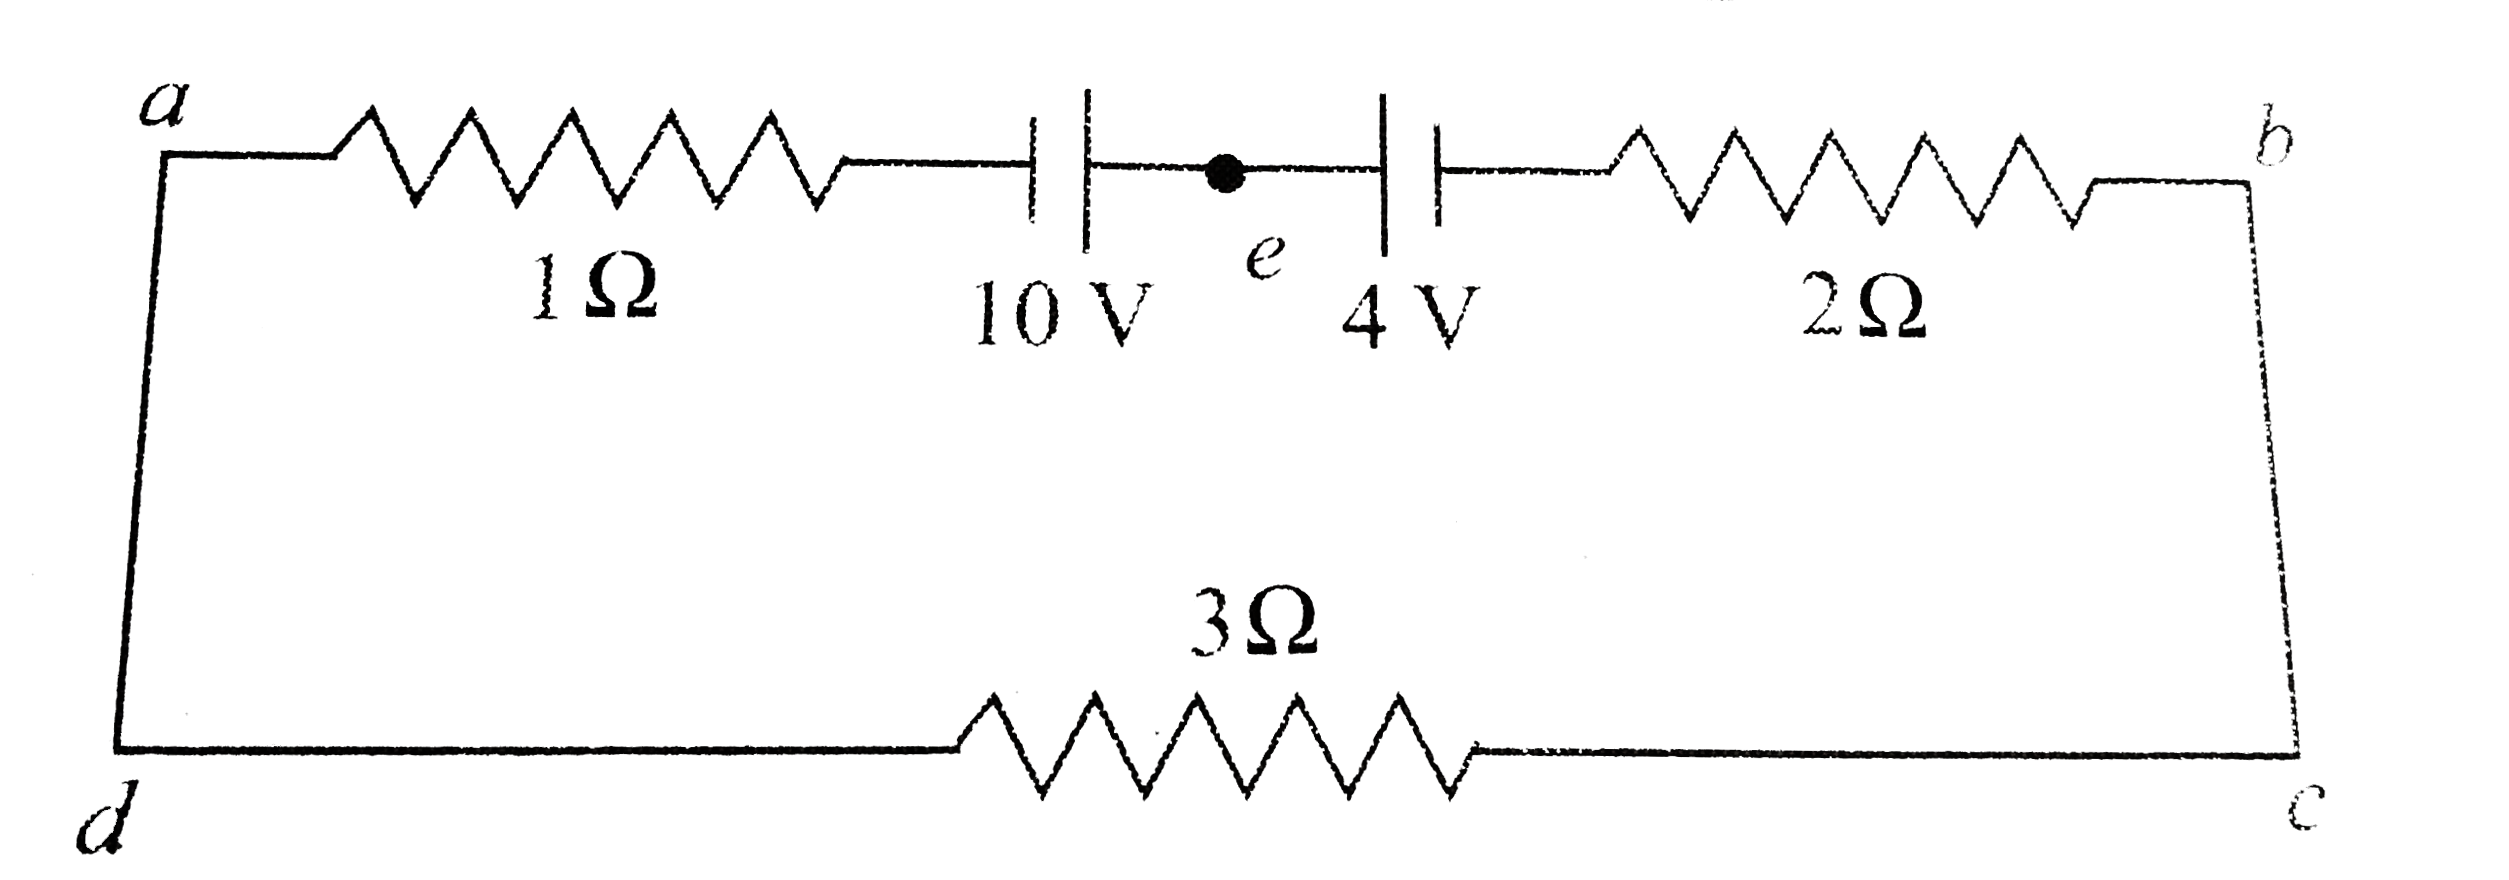 In the circuit shown in fig. the magnitdues and the direction of the flow of current, respectively, would be